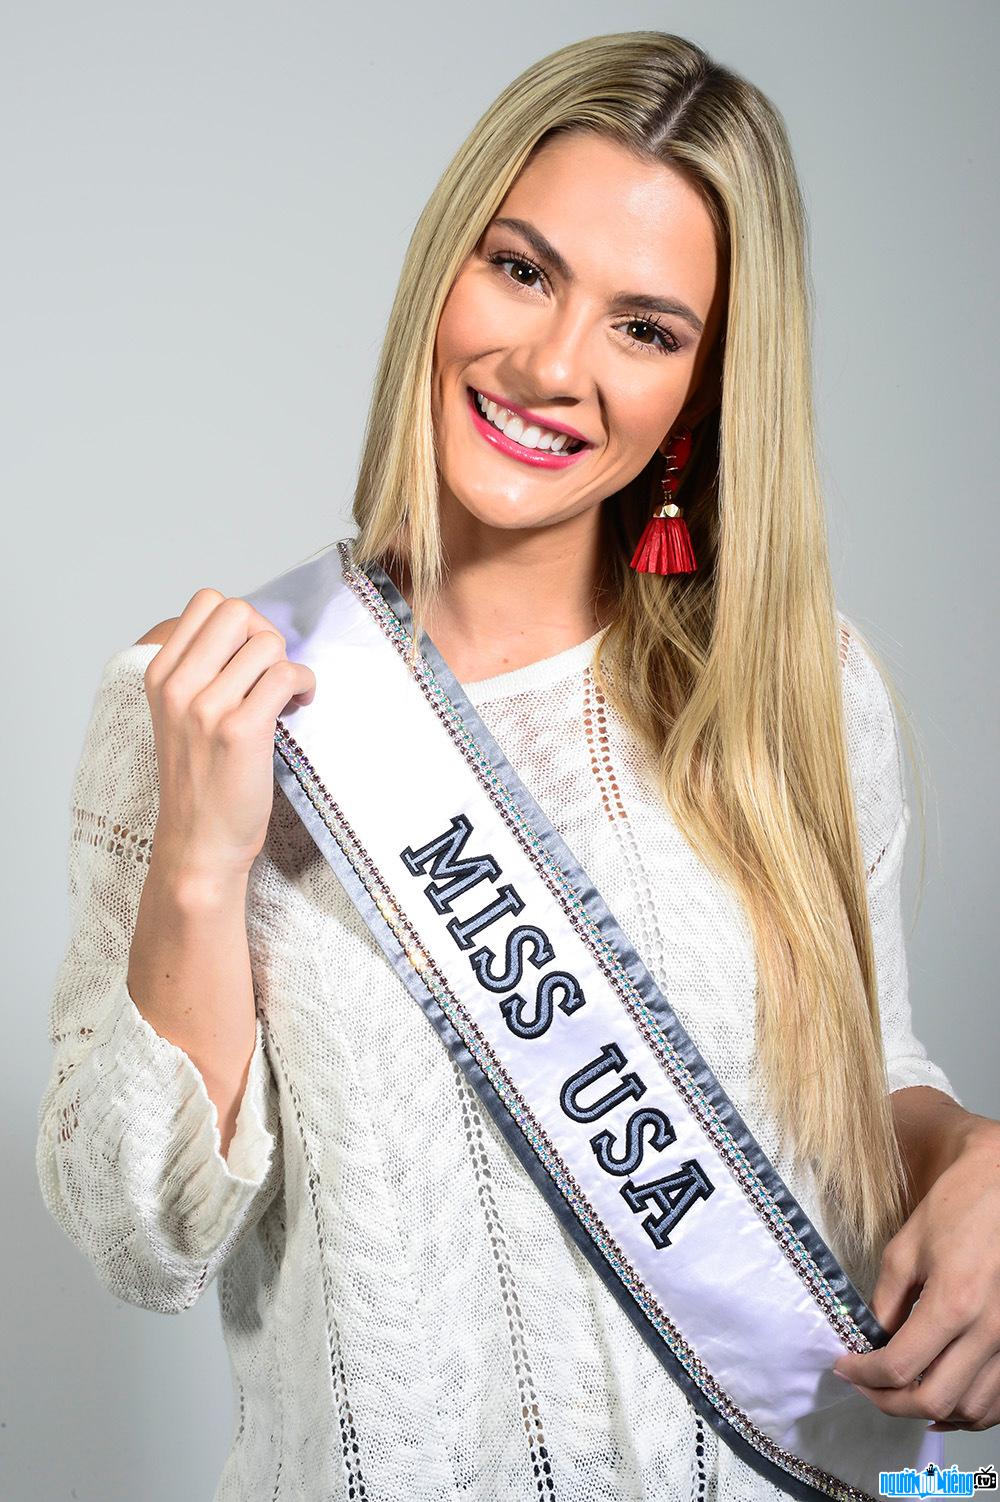 Sarah Rose Summer was crowned Miss America 2018 to represent the United States at the Miss Universe 2018 pageant